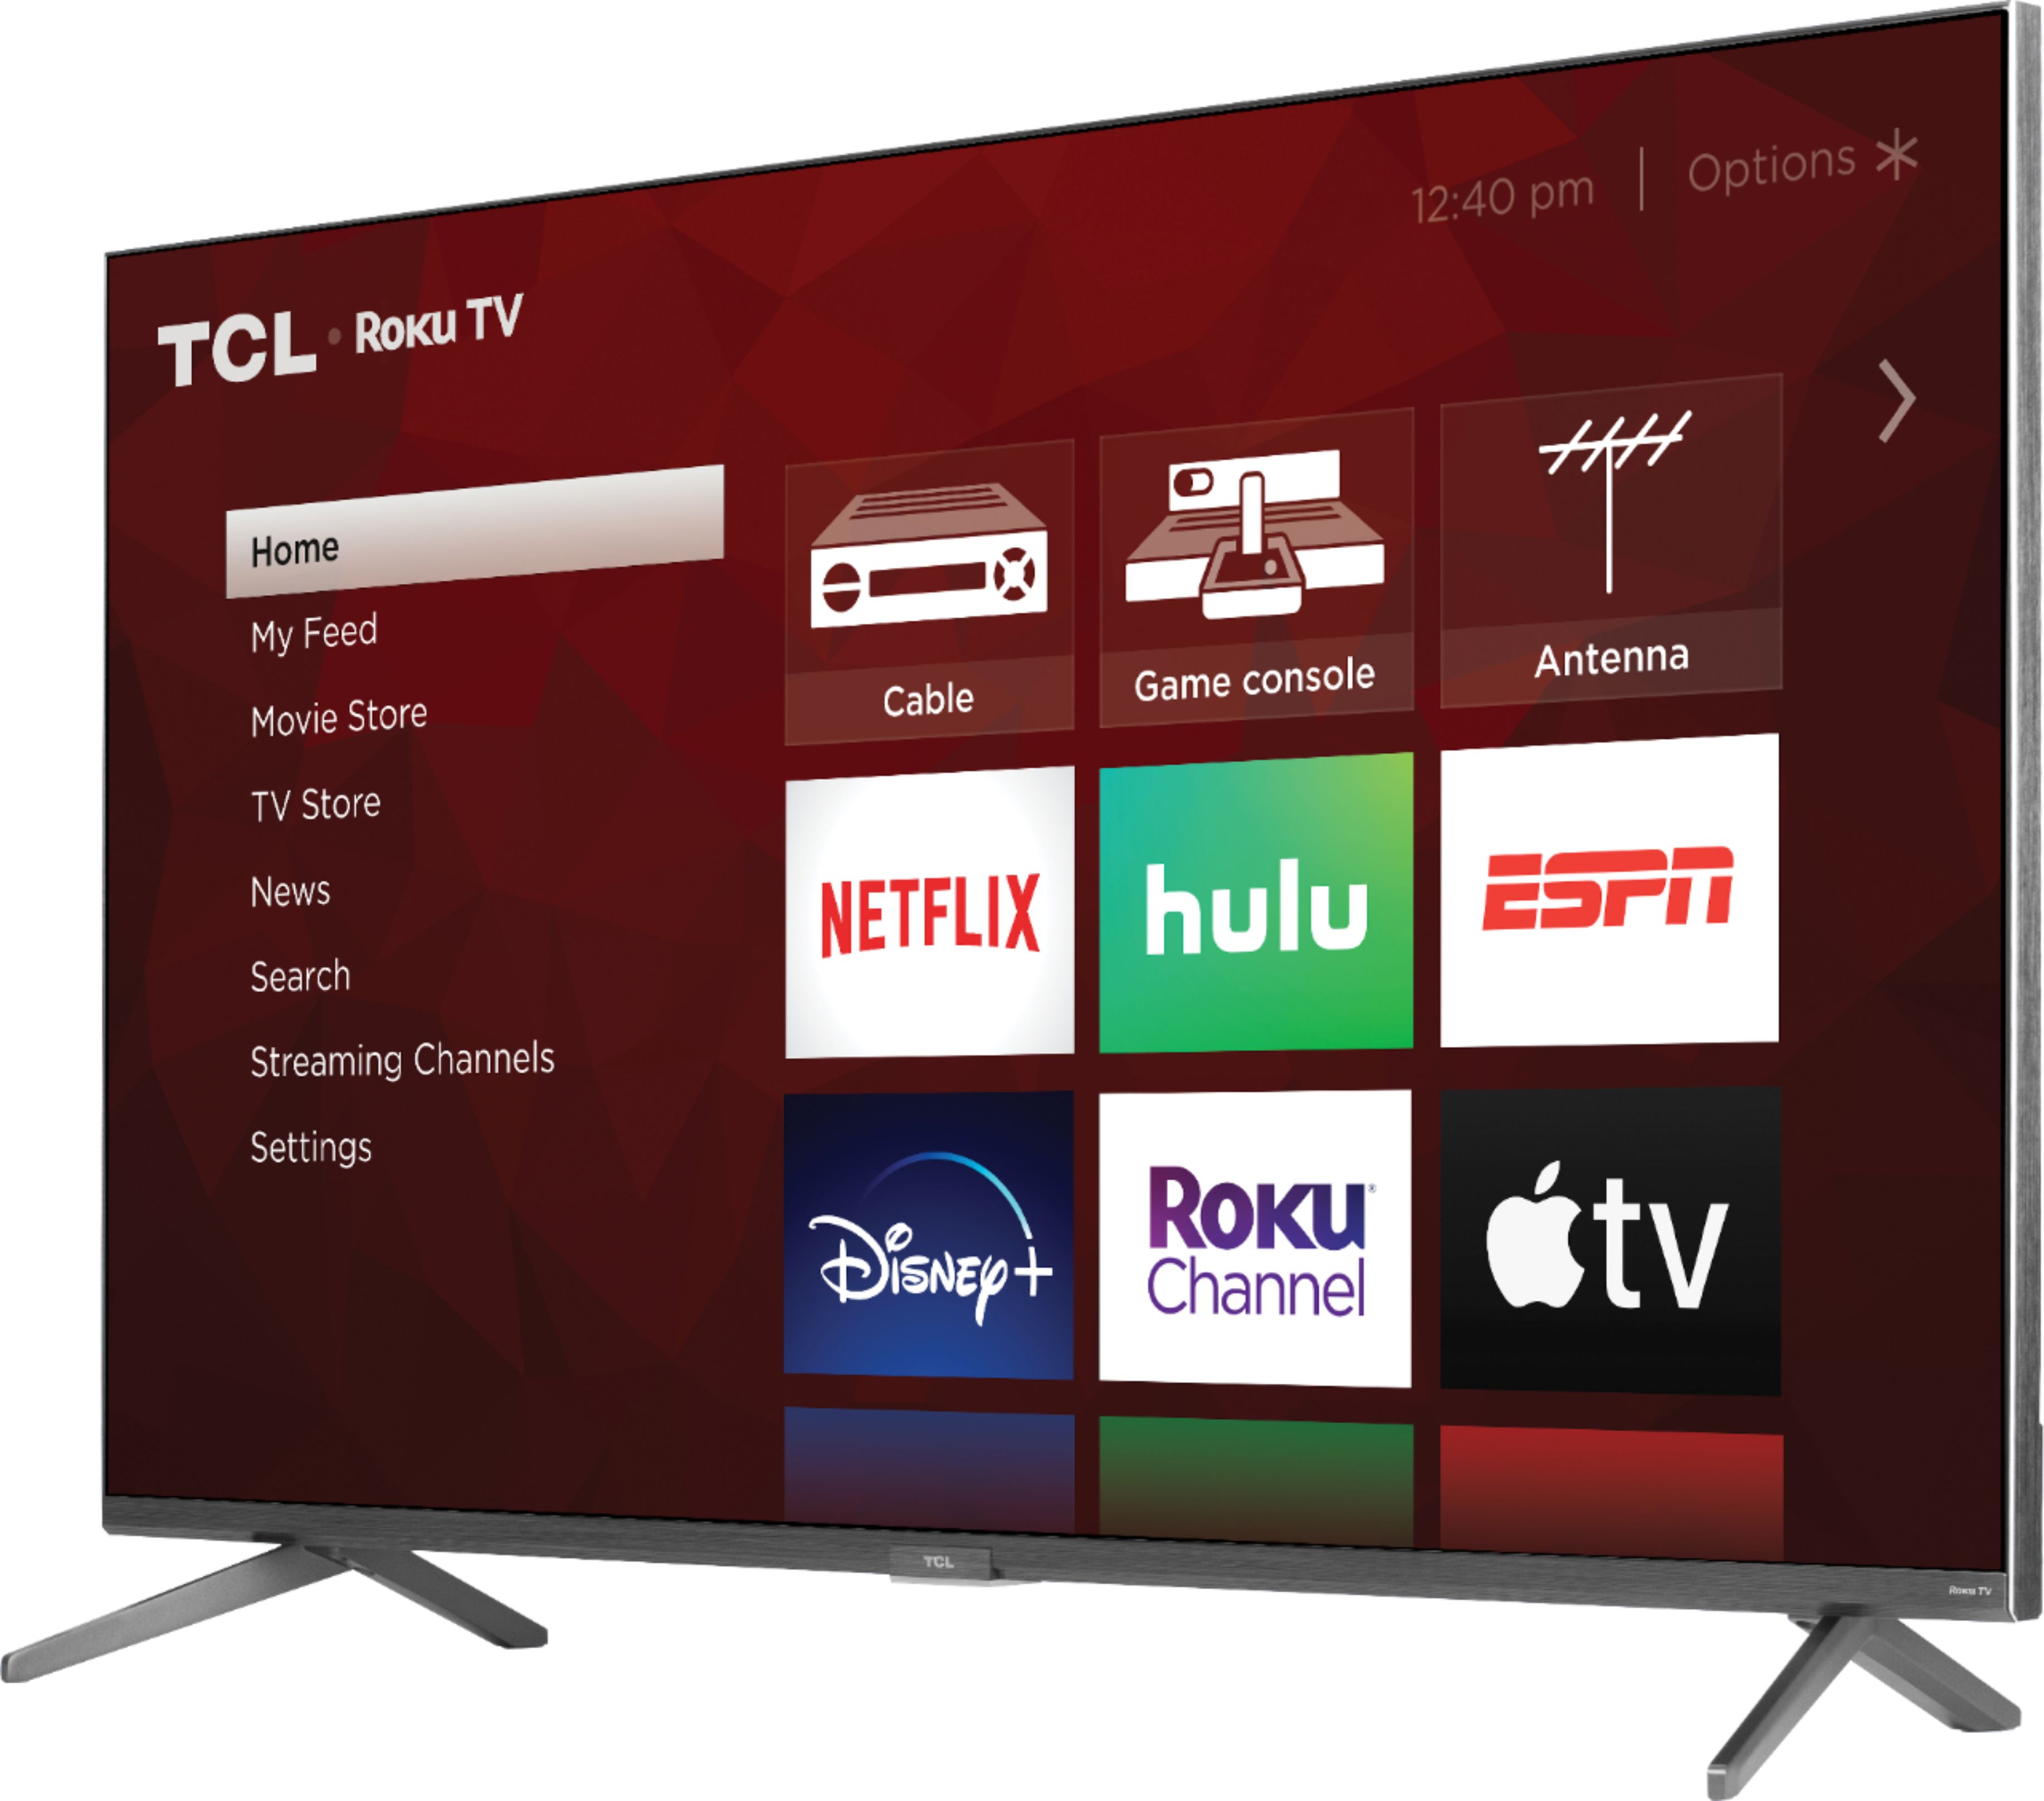 Hurry -- this 65-inch TCL 4K TV is discounted to $400